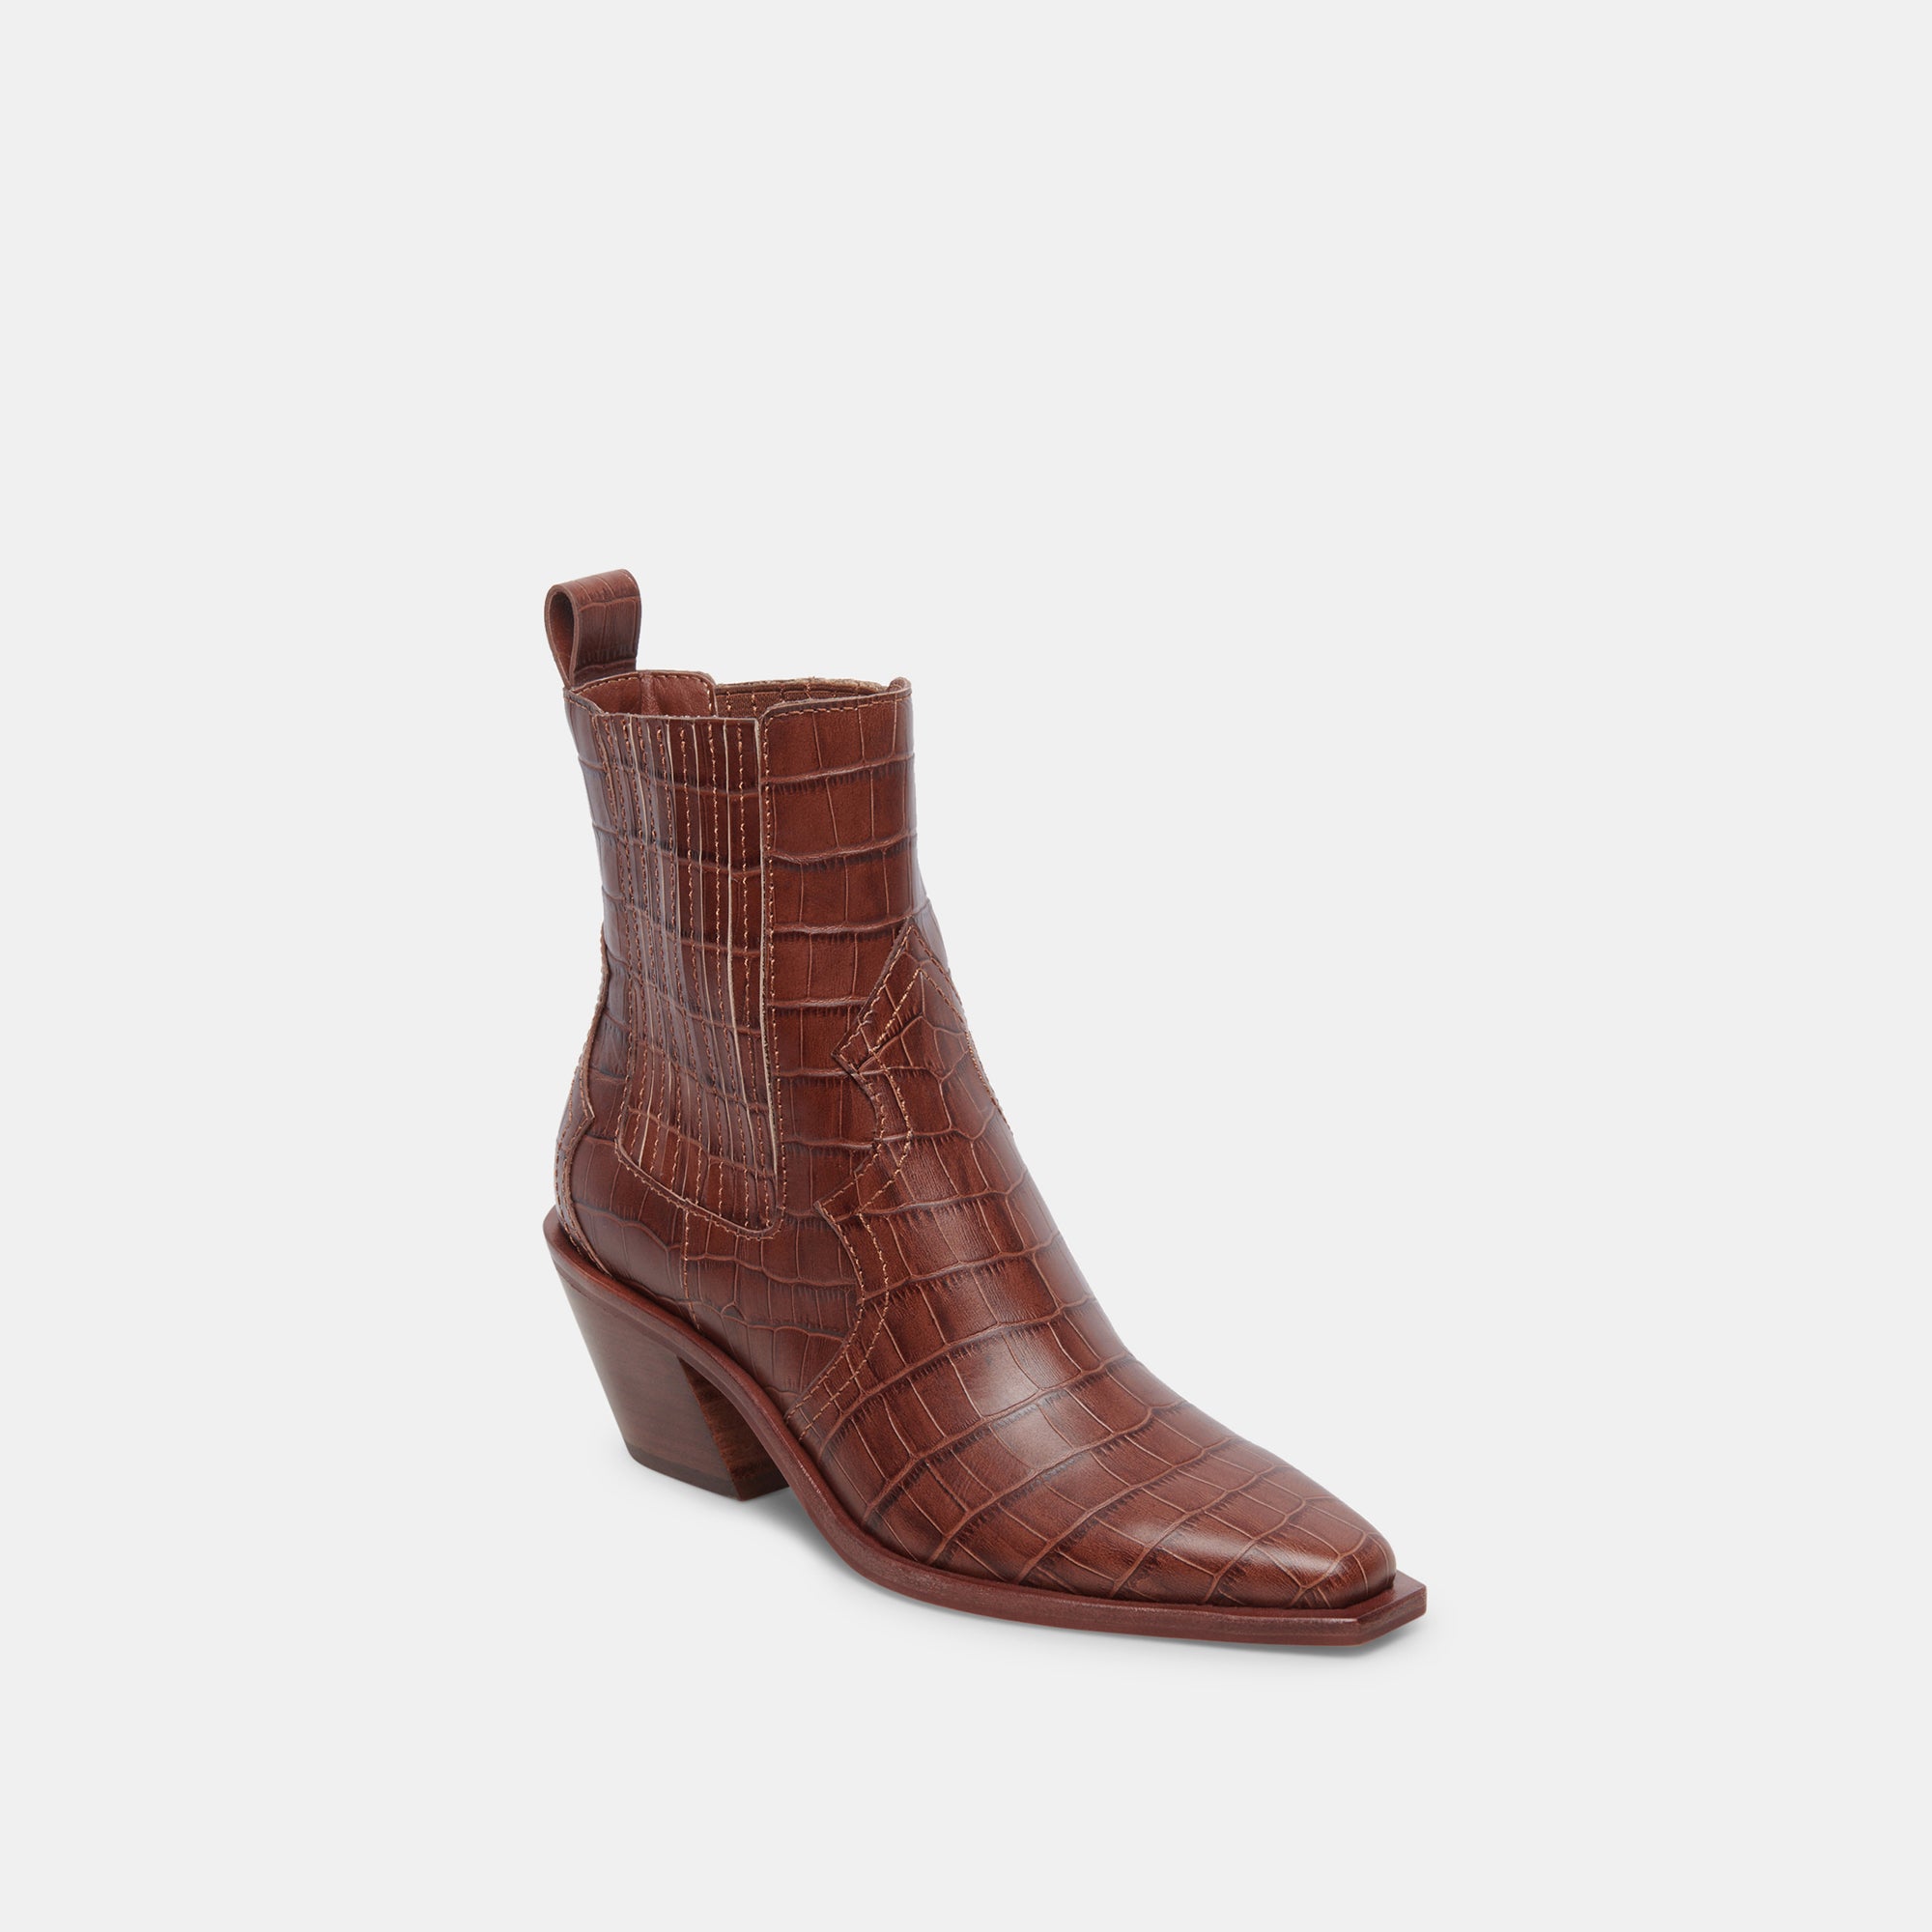 Senna Booties Walnut Embossed Leather | Women's Leather Cowboy Boots ...